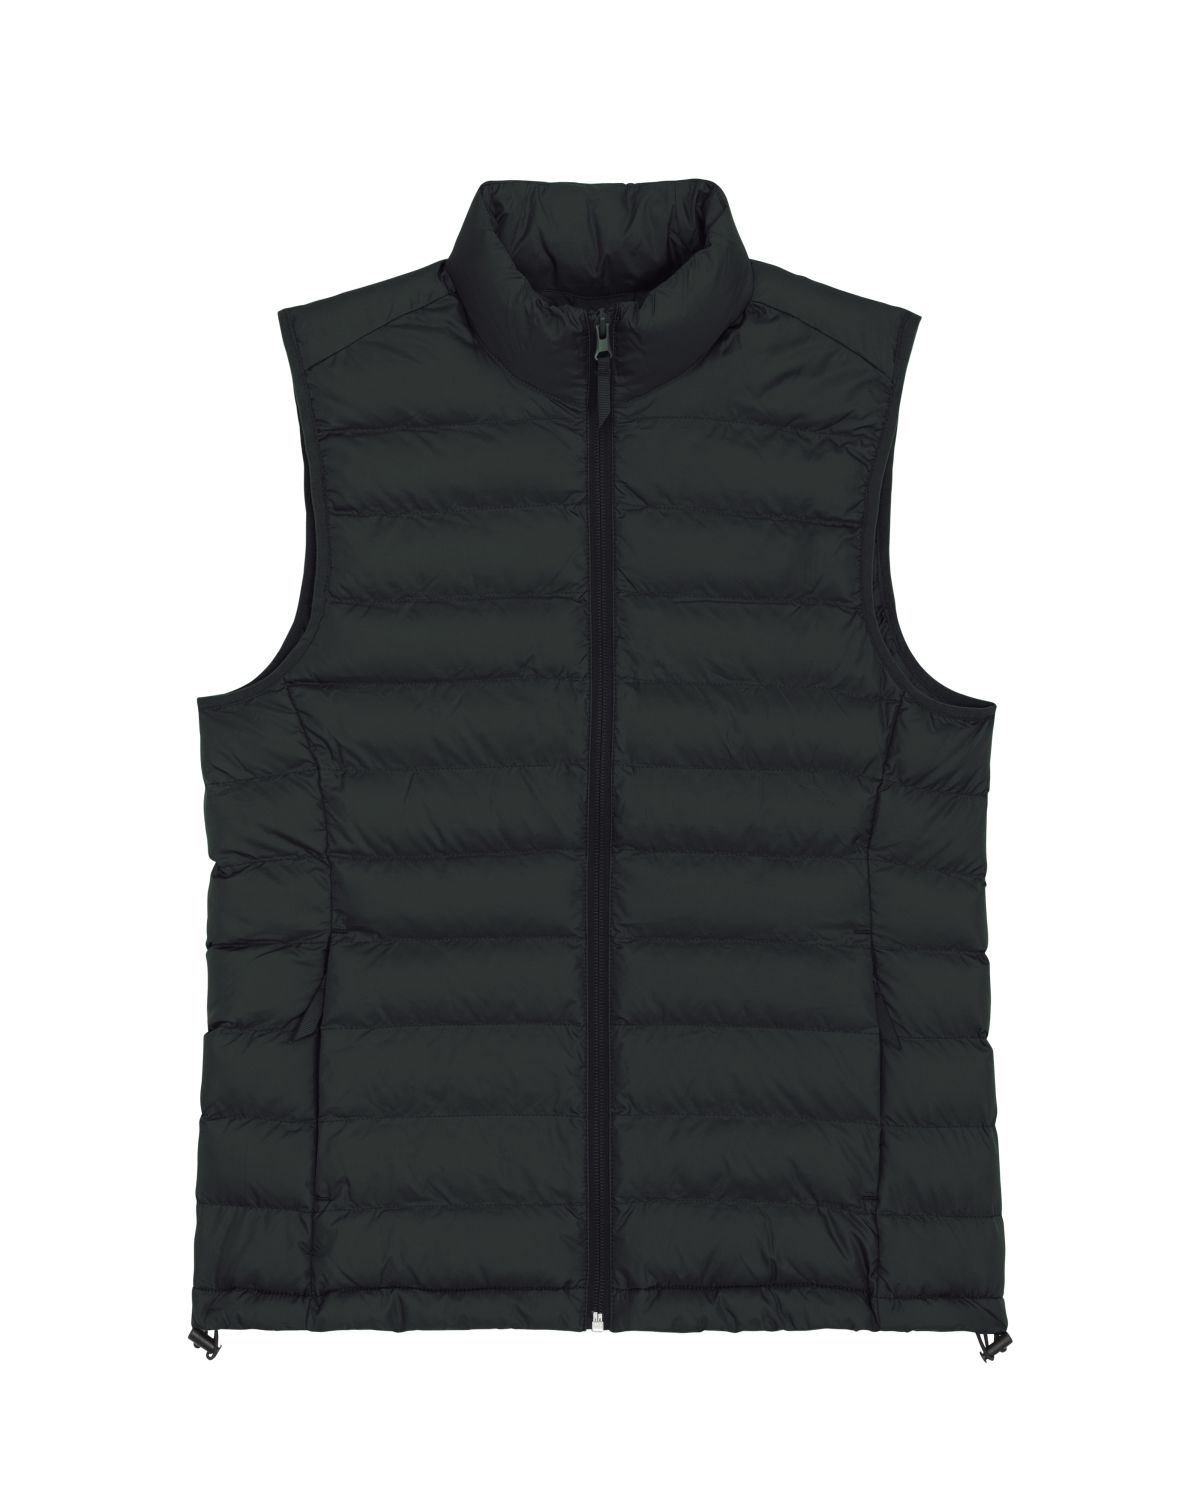 Customize your own sustainable vest. Main, padding, and lining are all made of 100% recycled polyester, Fluorine- free